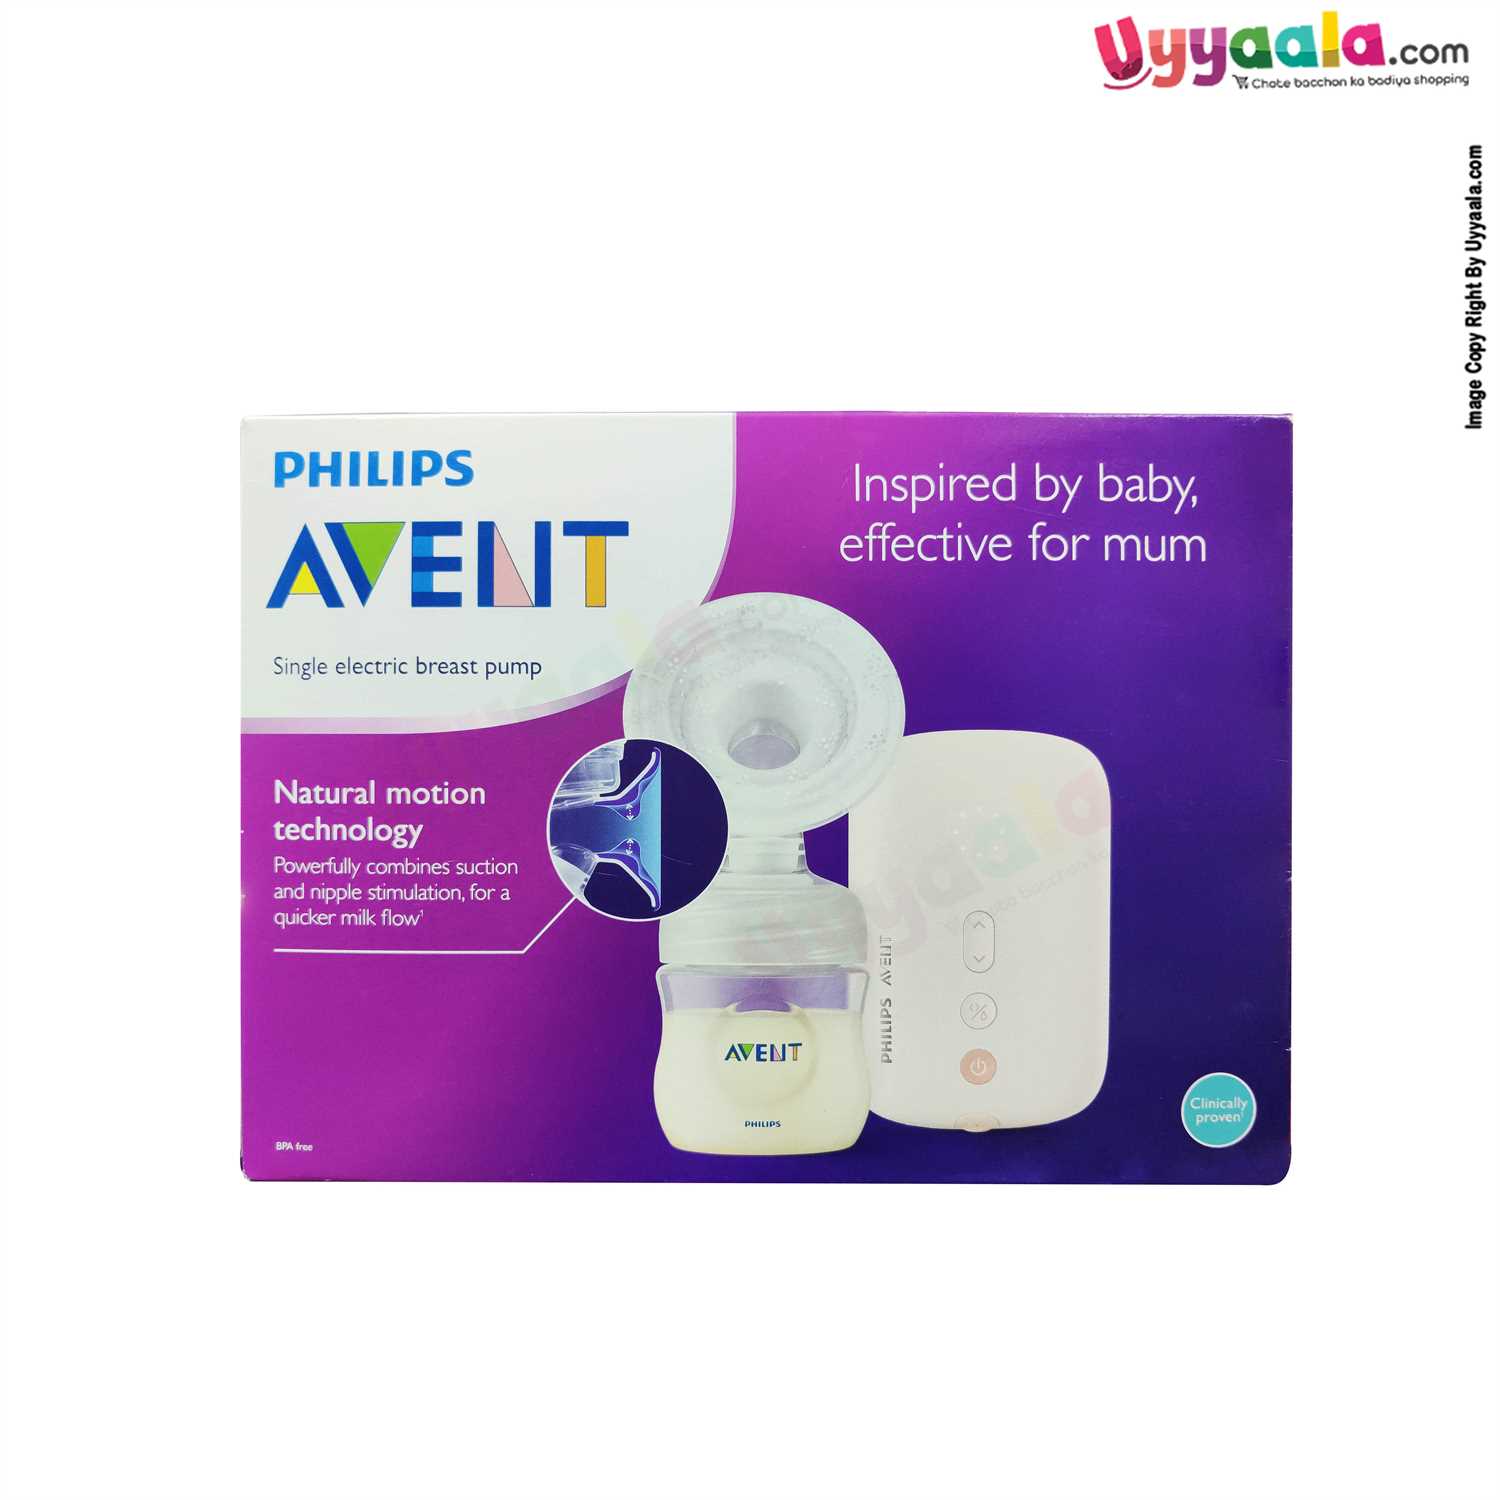 PHILIPS AVENT Single Electric Breast Pump